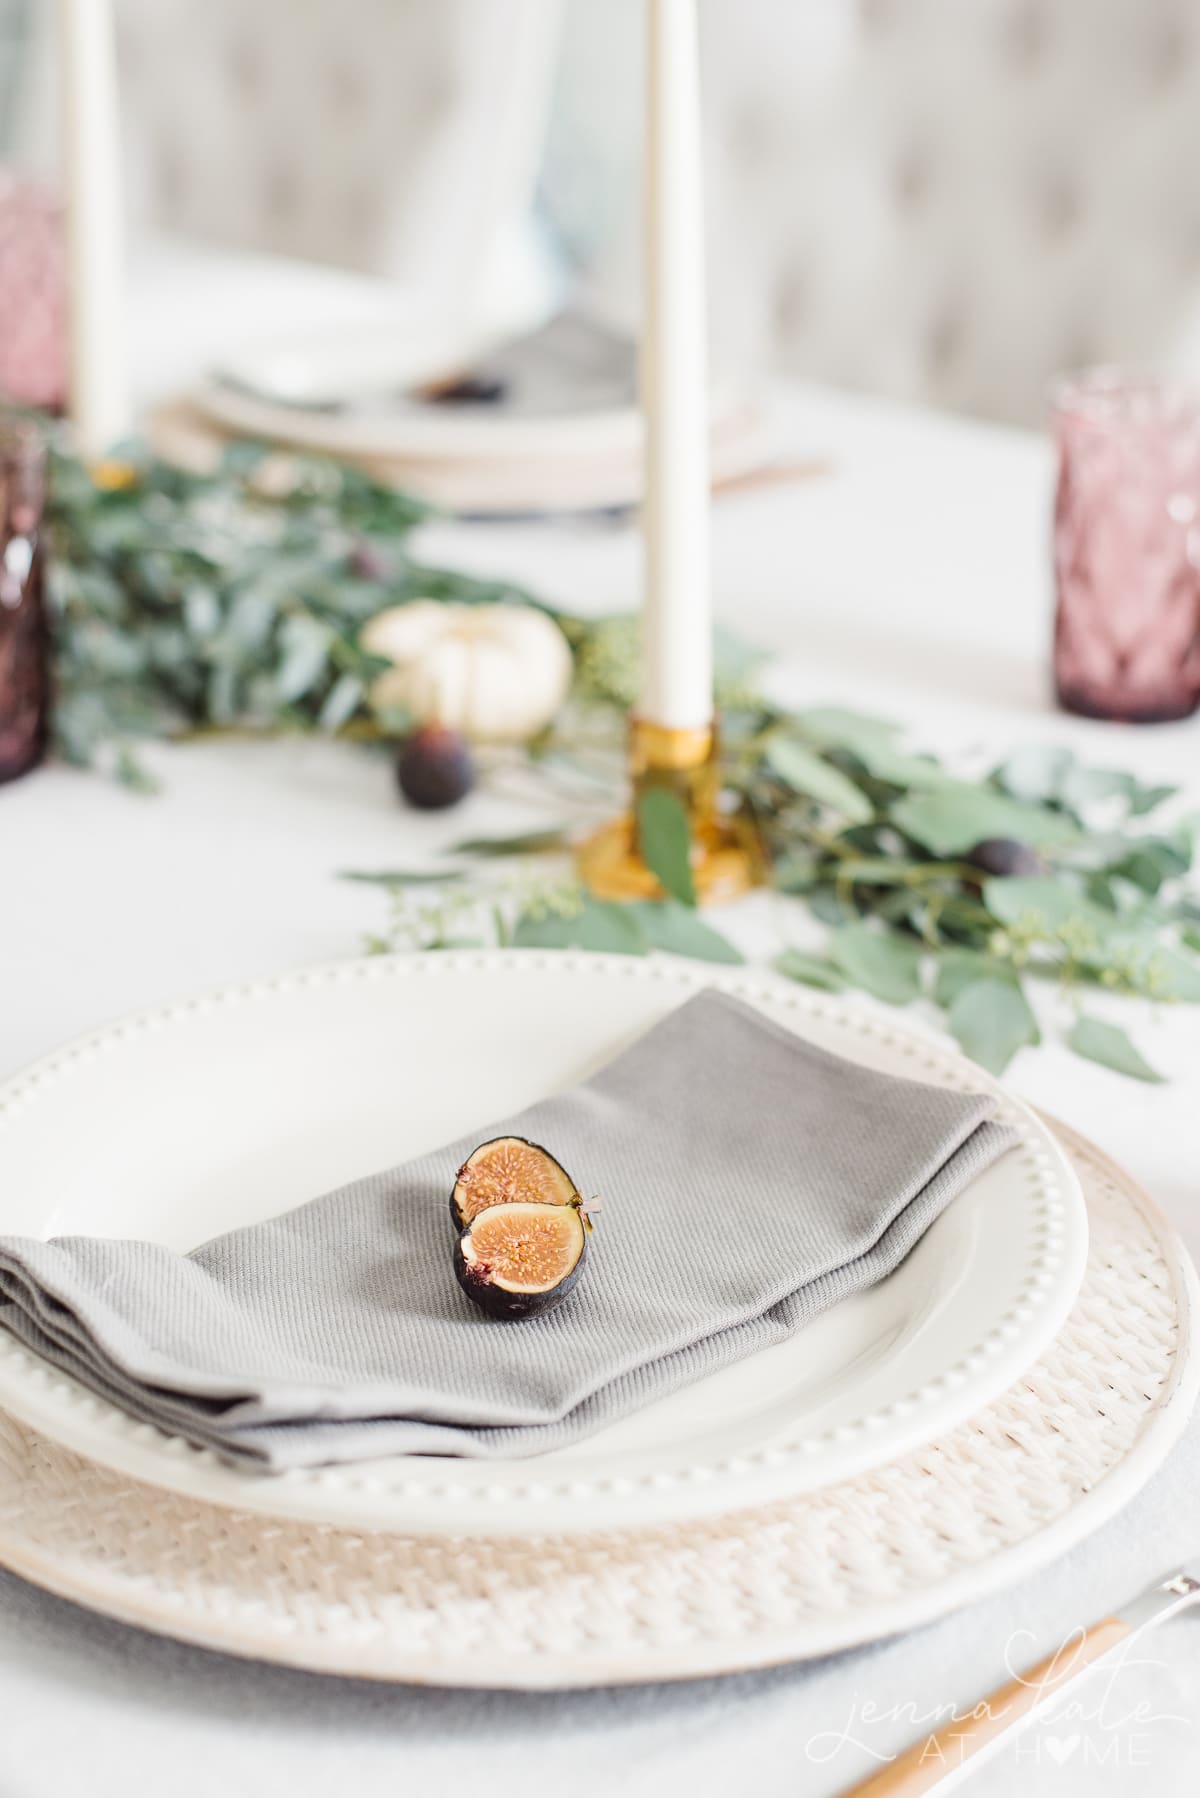 A cut fig is the natural inspiration for the color theme on the tablescape